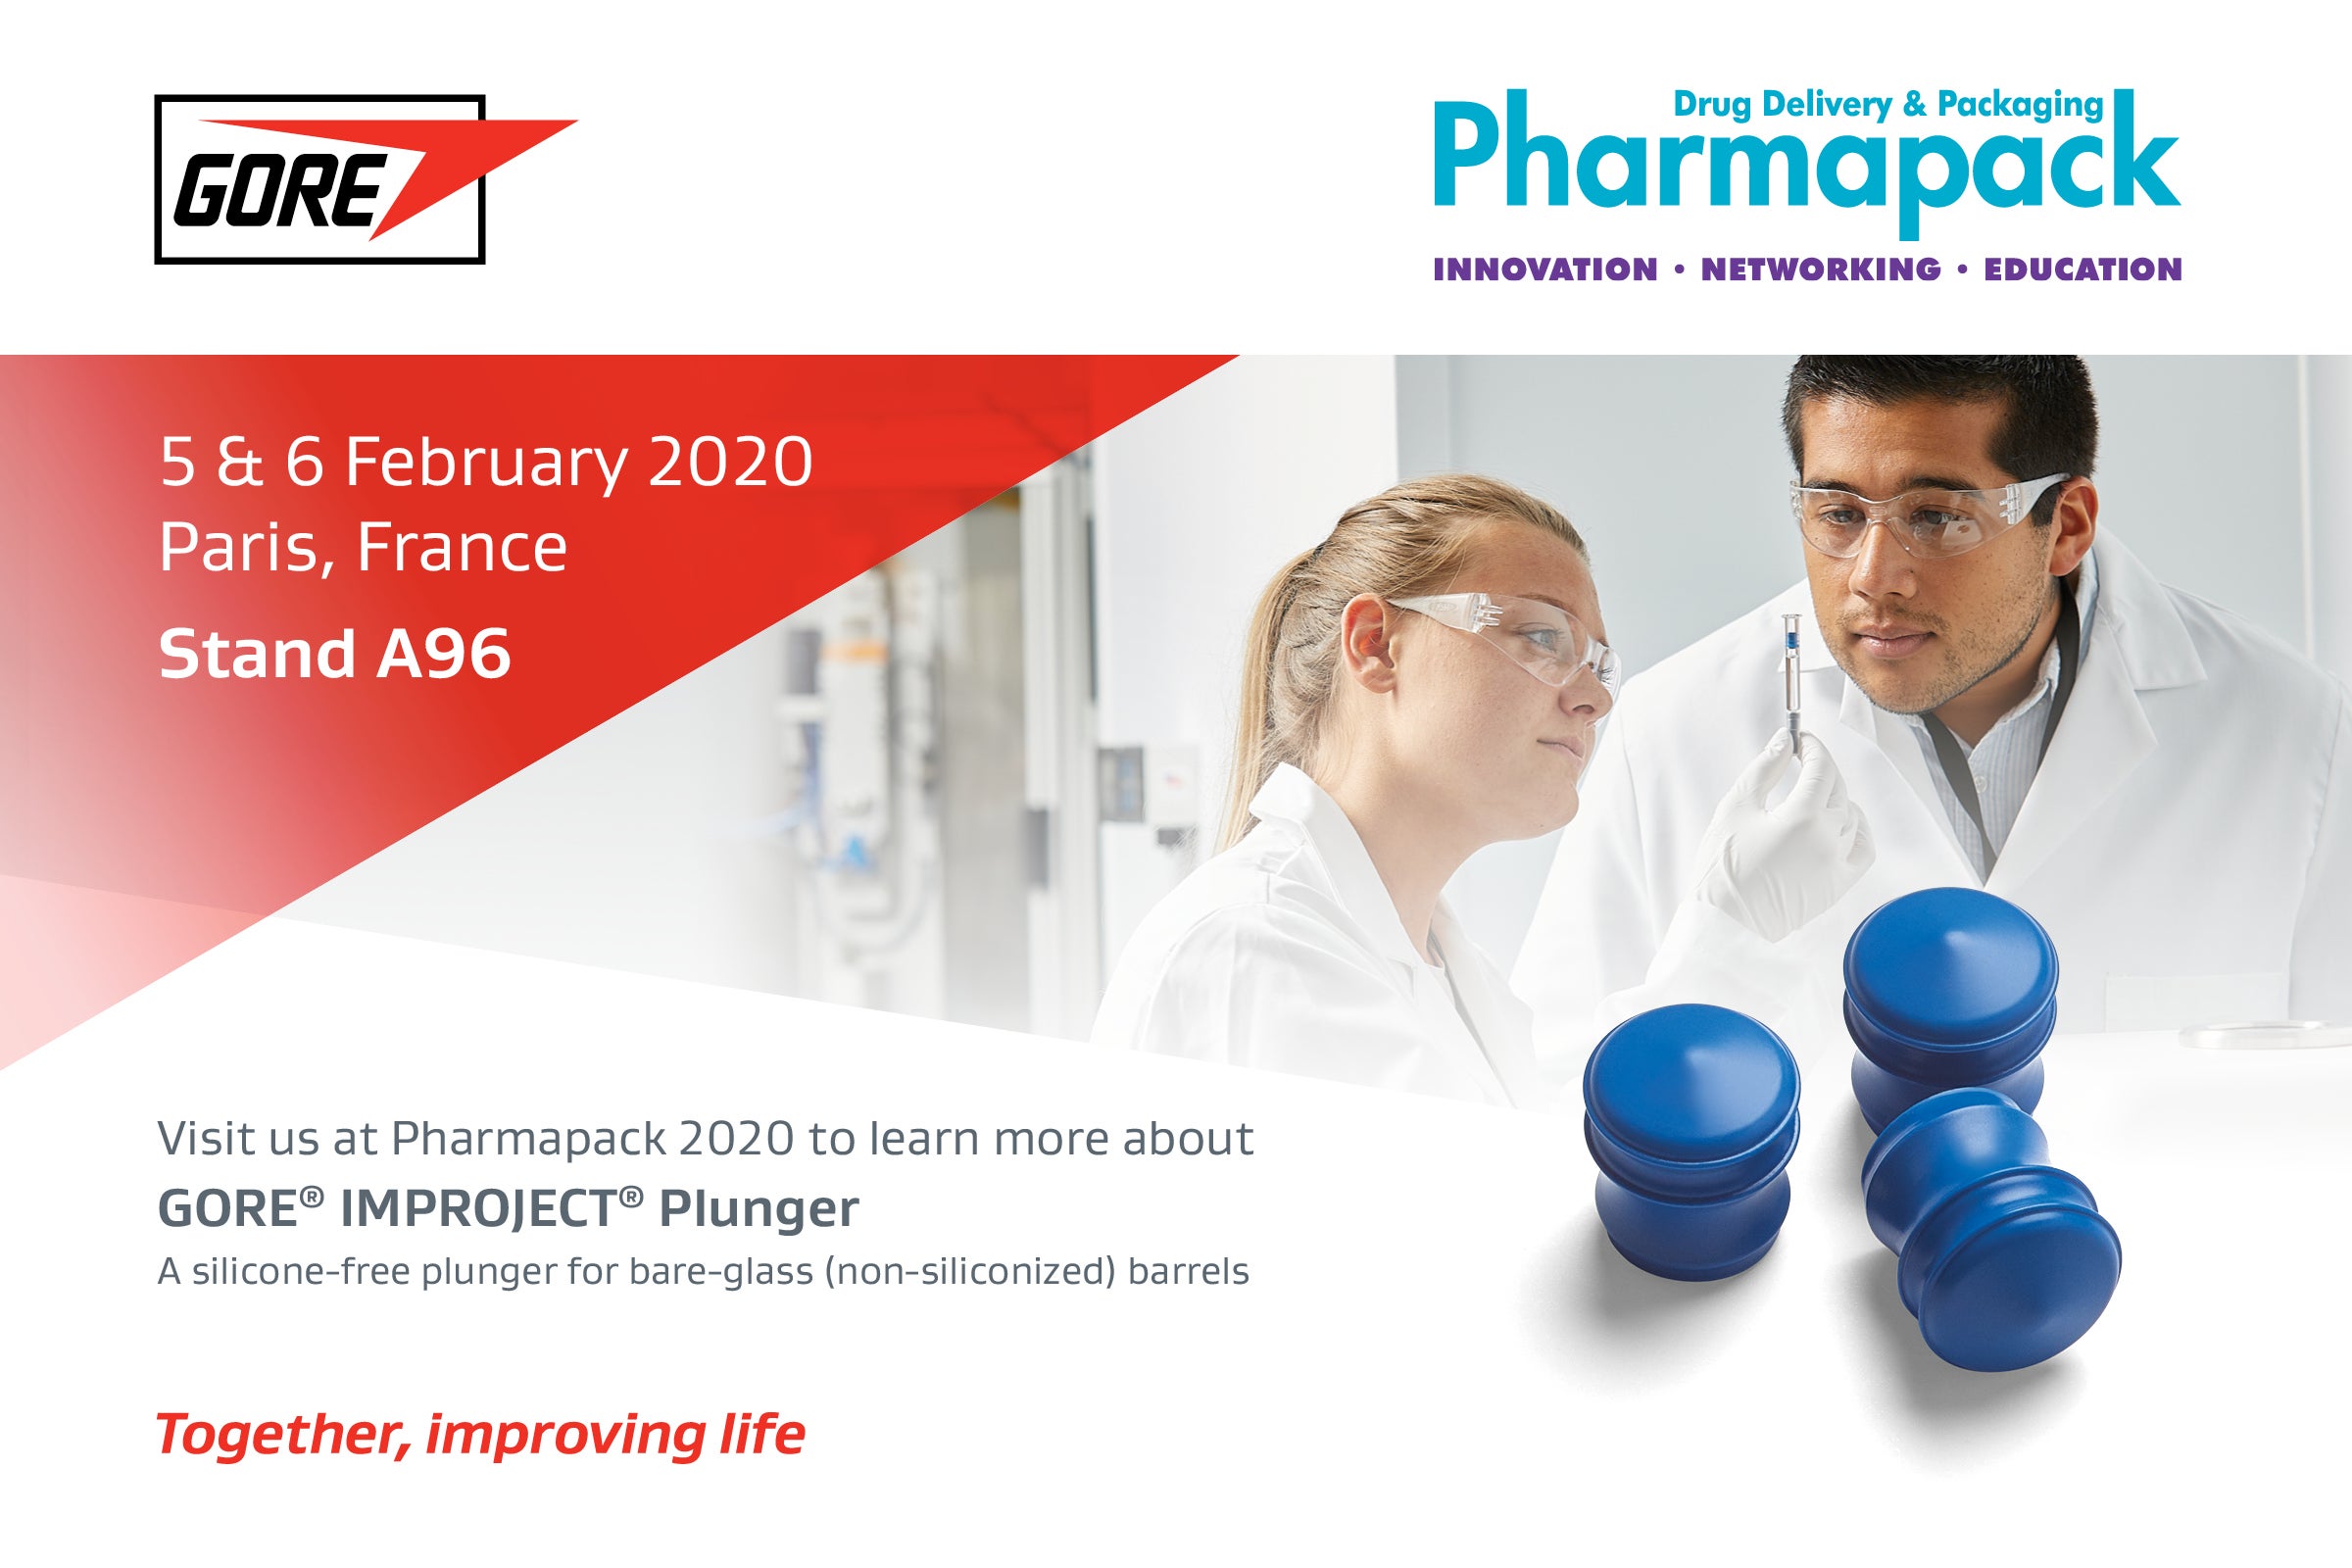 Visit us at Pharmapack 2020 to learn more about GORE® IMPROJECT® PLUNGER